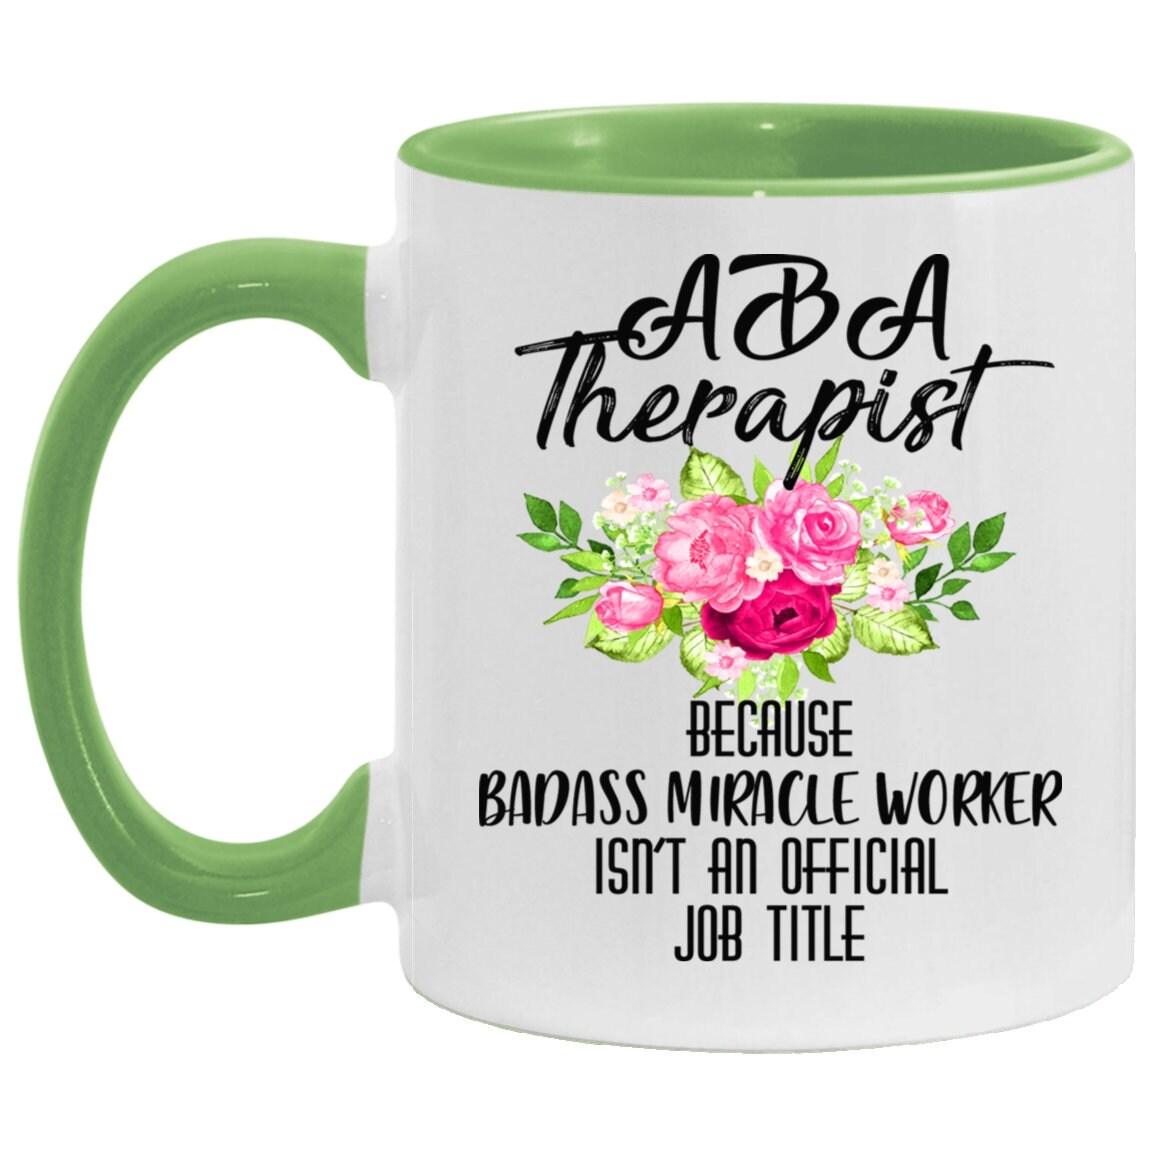 aba therapist  Accent Mug || bcba gifts || Behavioral Therapist Mug - Because Badass Miracle Worker is Not an Official Job Title - plusminusco.com